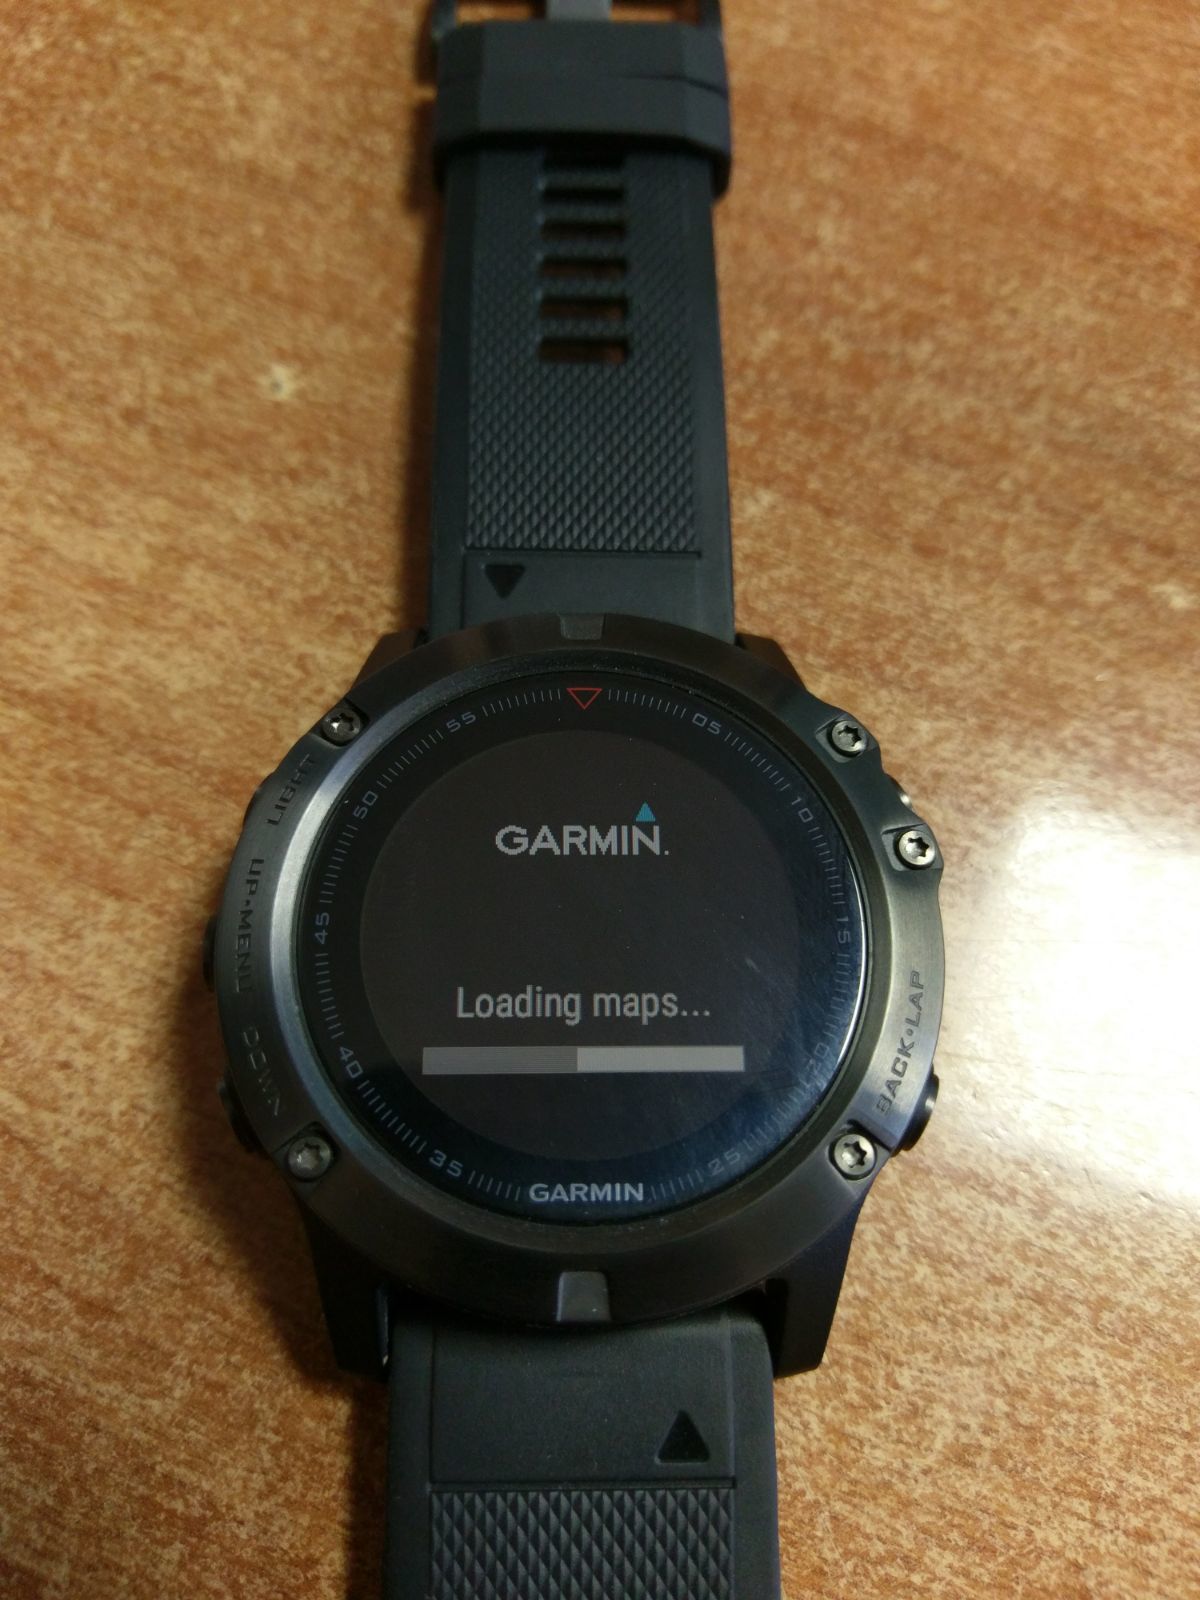 told it just this endless loop of "loading maps.Helppp - fēnix 5 series Wearables - Garmin Forums